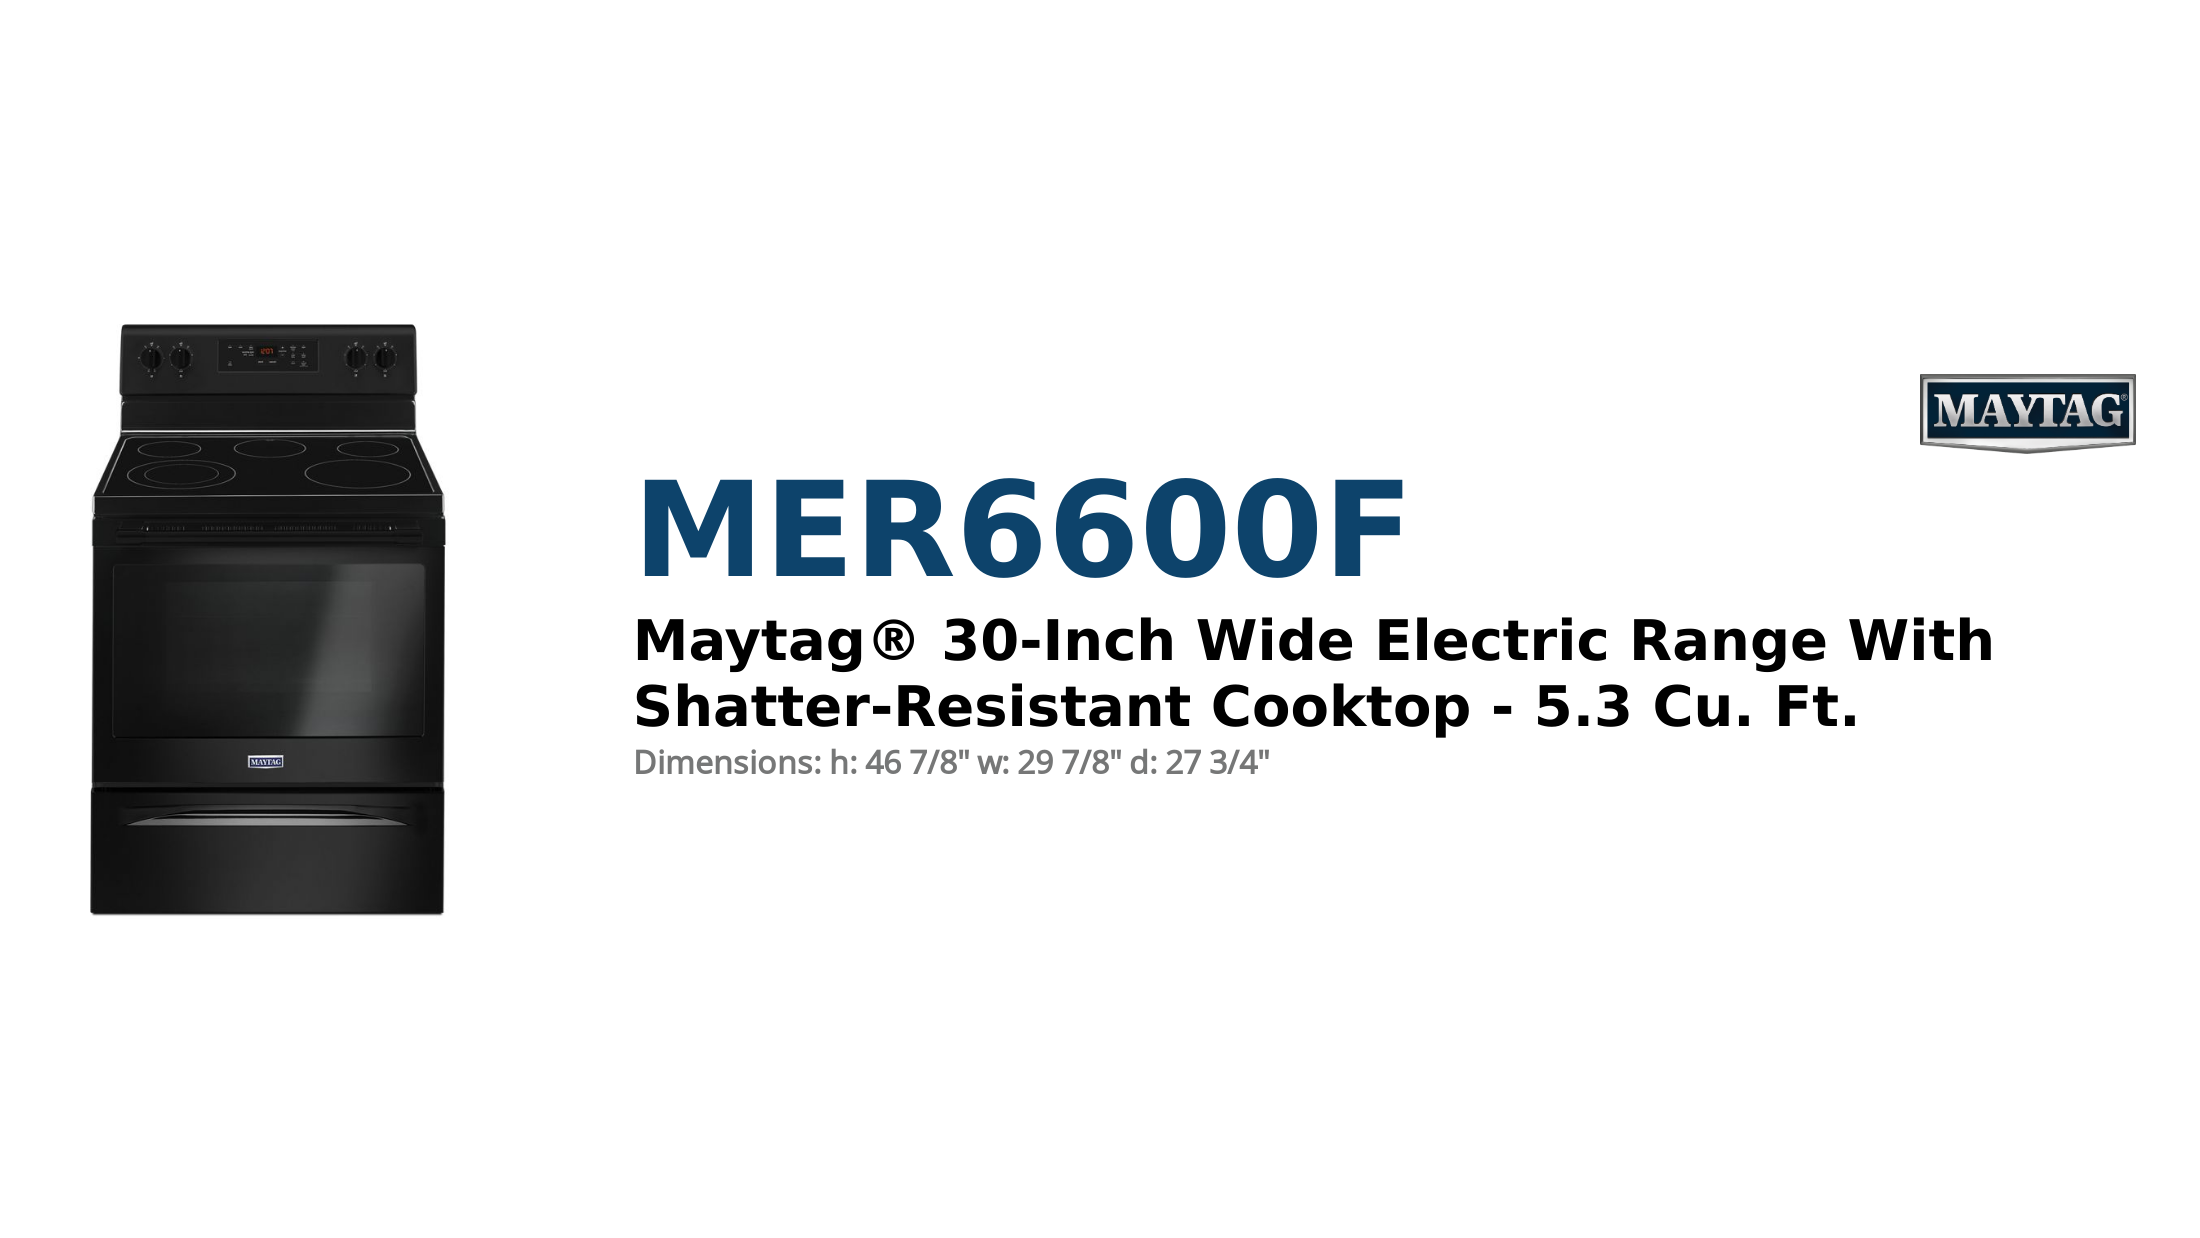 Maytag® 30-Inch Wide Electric Range With Shatter-Resistant Cooktop - 5.3 Cu. Ft.
 